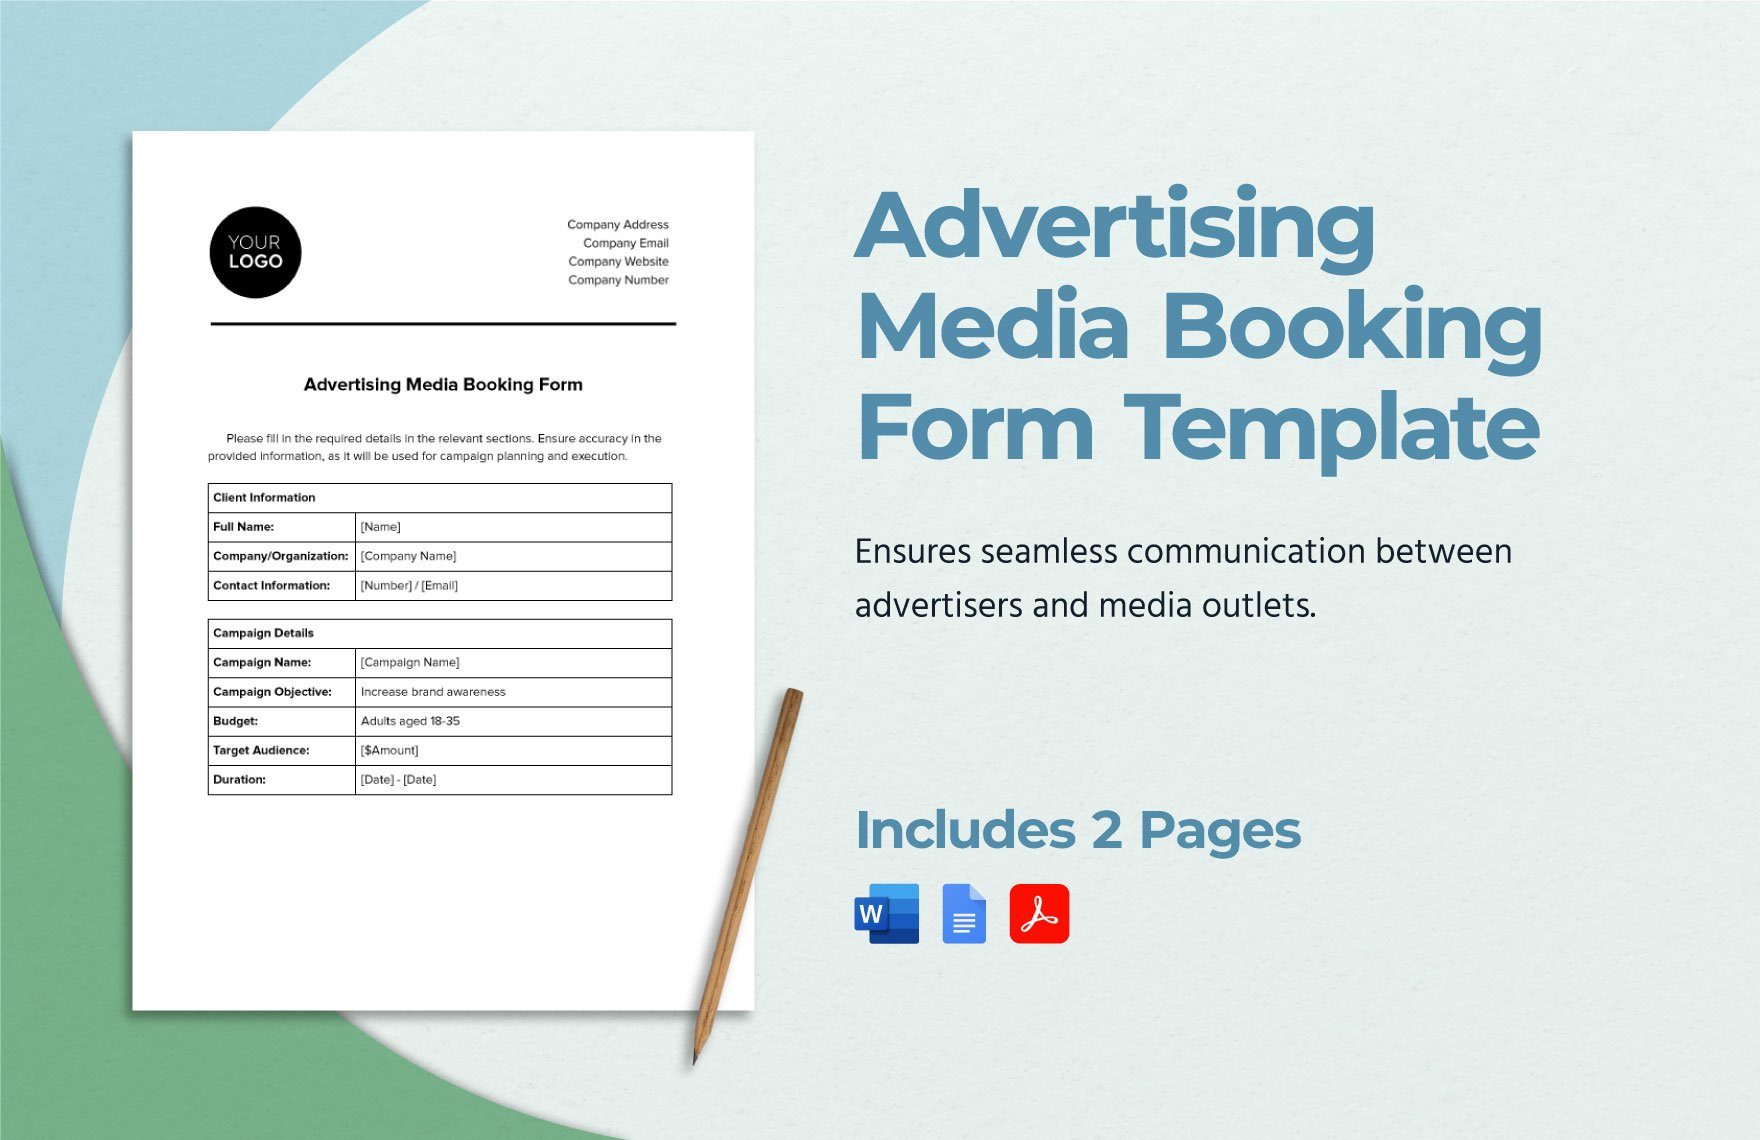 Advertising Media Booking Form Template in Word, Google Docs, PDF